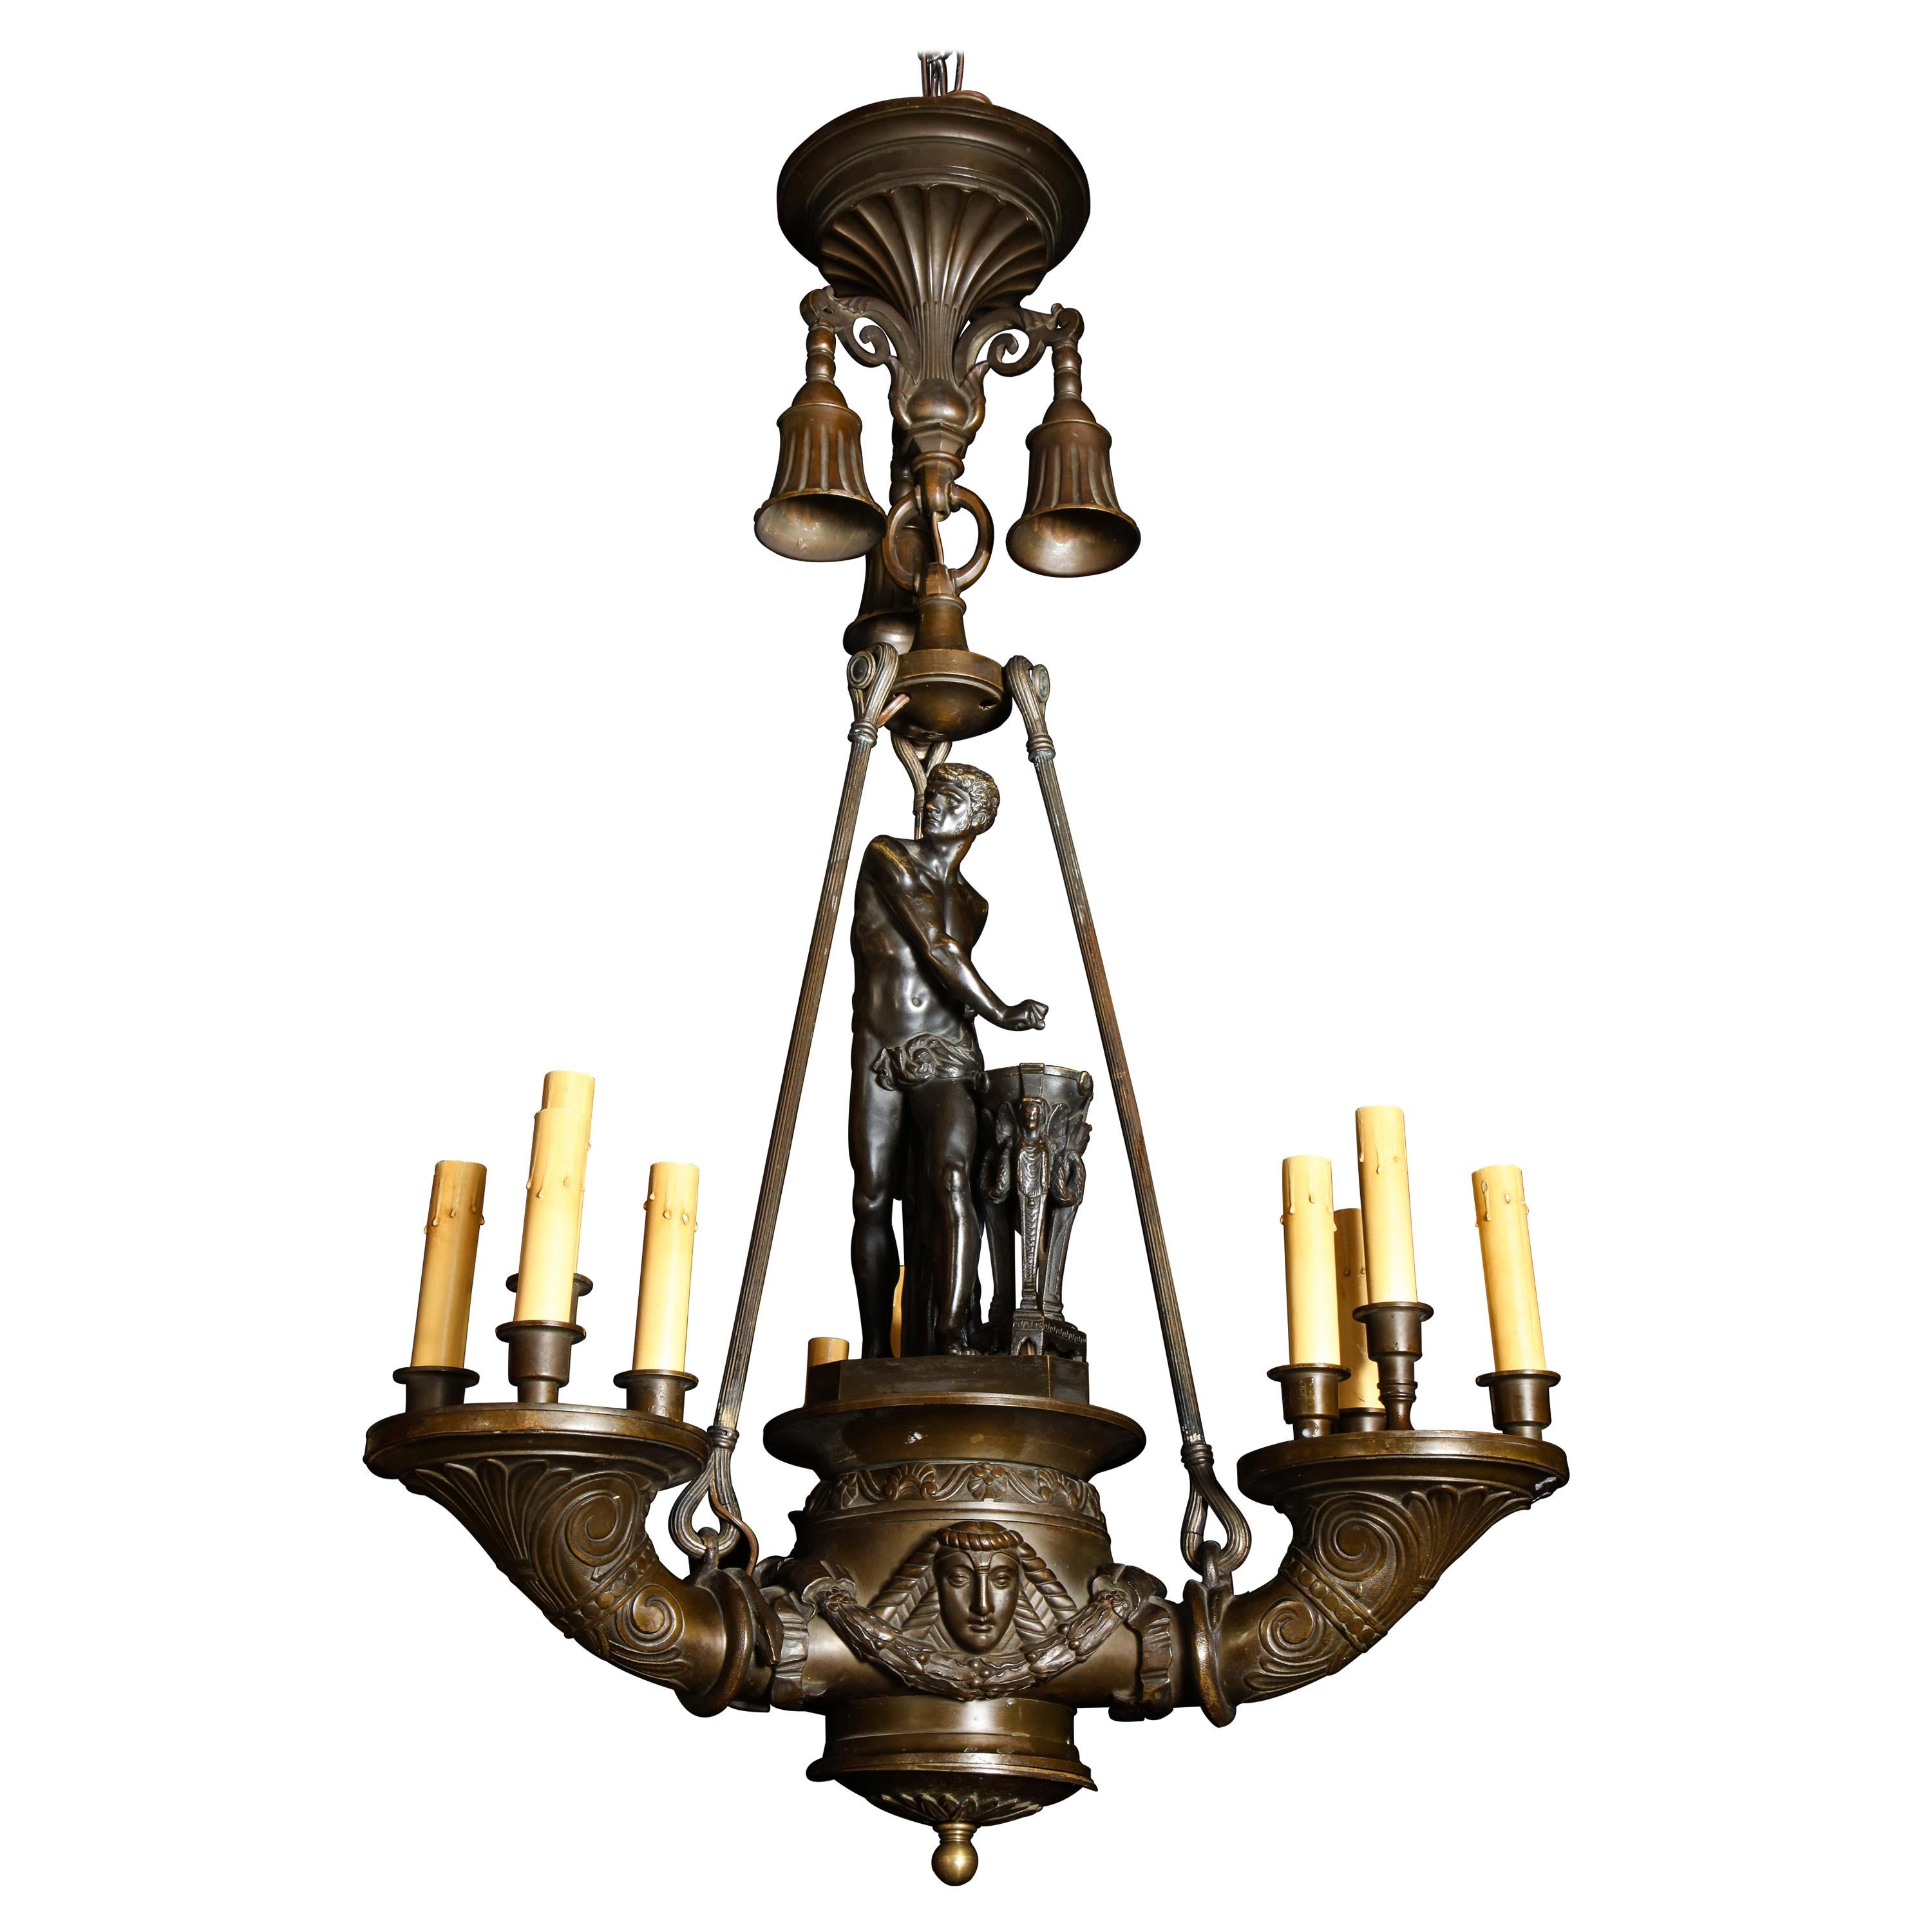 Spectacular Antique Italian Neoclassical Patinated Bronze Figural Chandelier